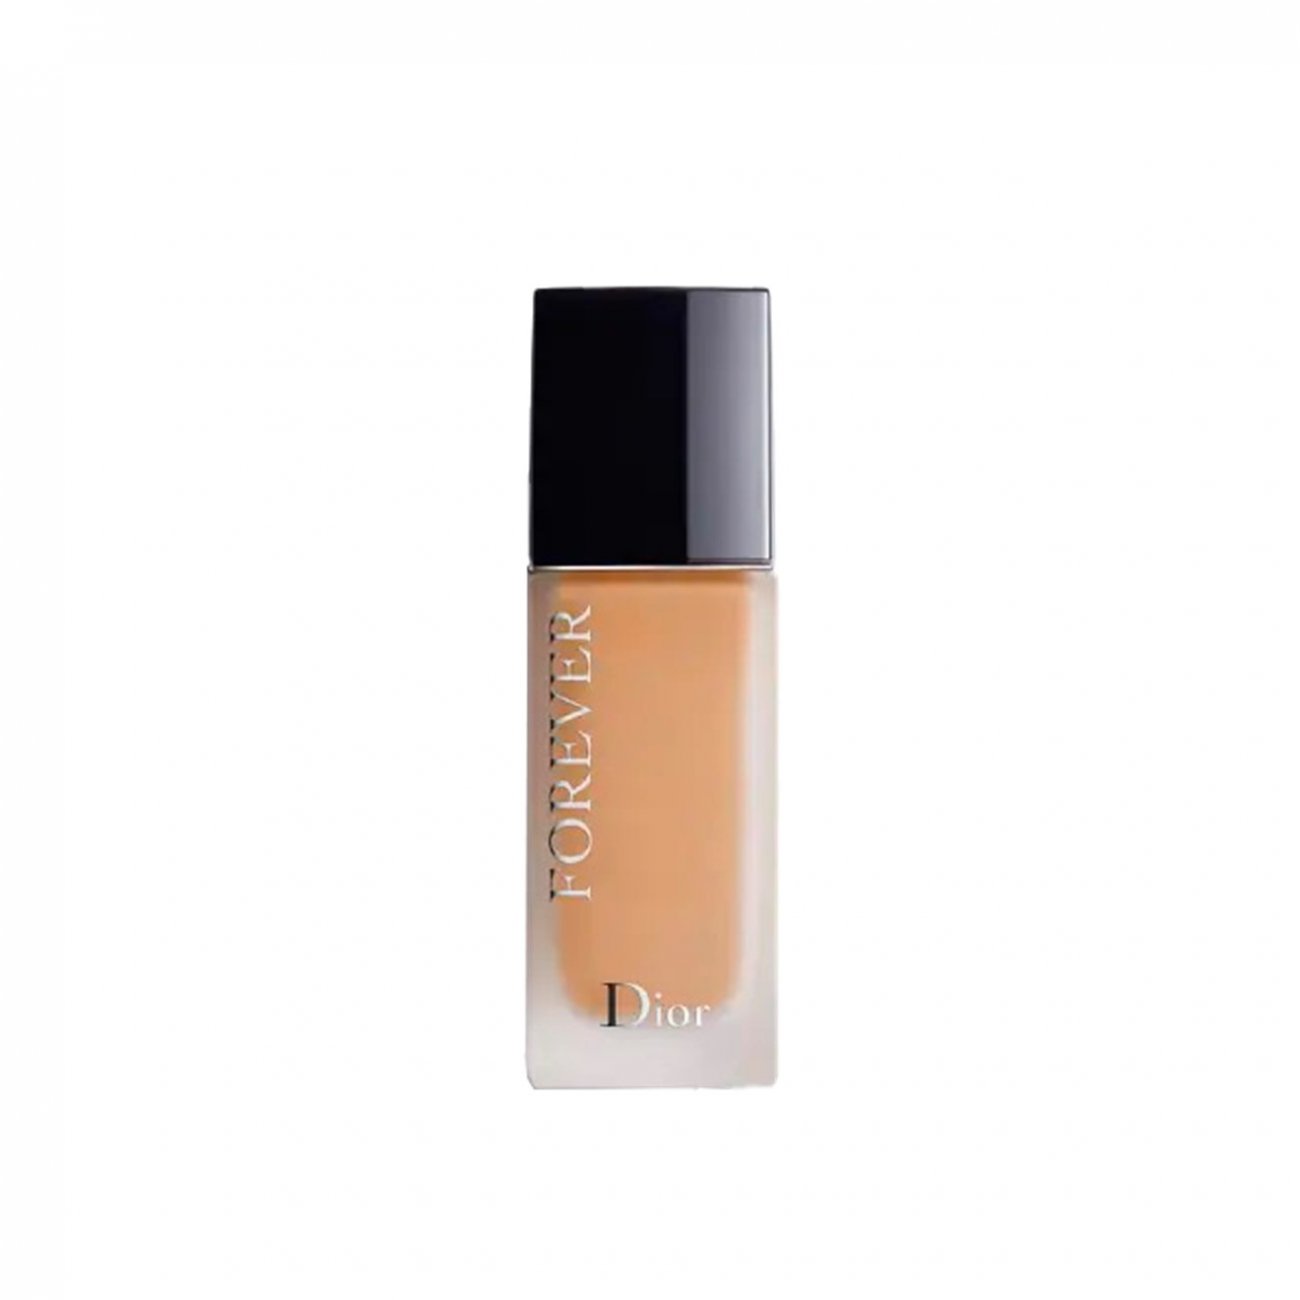 DIOR Forever Skin Glow 24h Hydrating Radiant Foundation Buy DIOR Forever  Skin Glow 24h Hydrating Radiant Foundation Online at Best Price in India   Nykaa